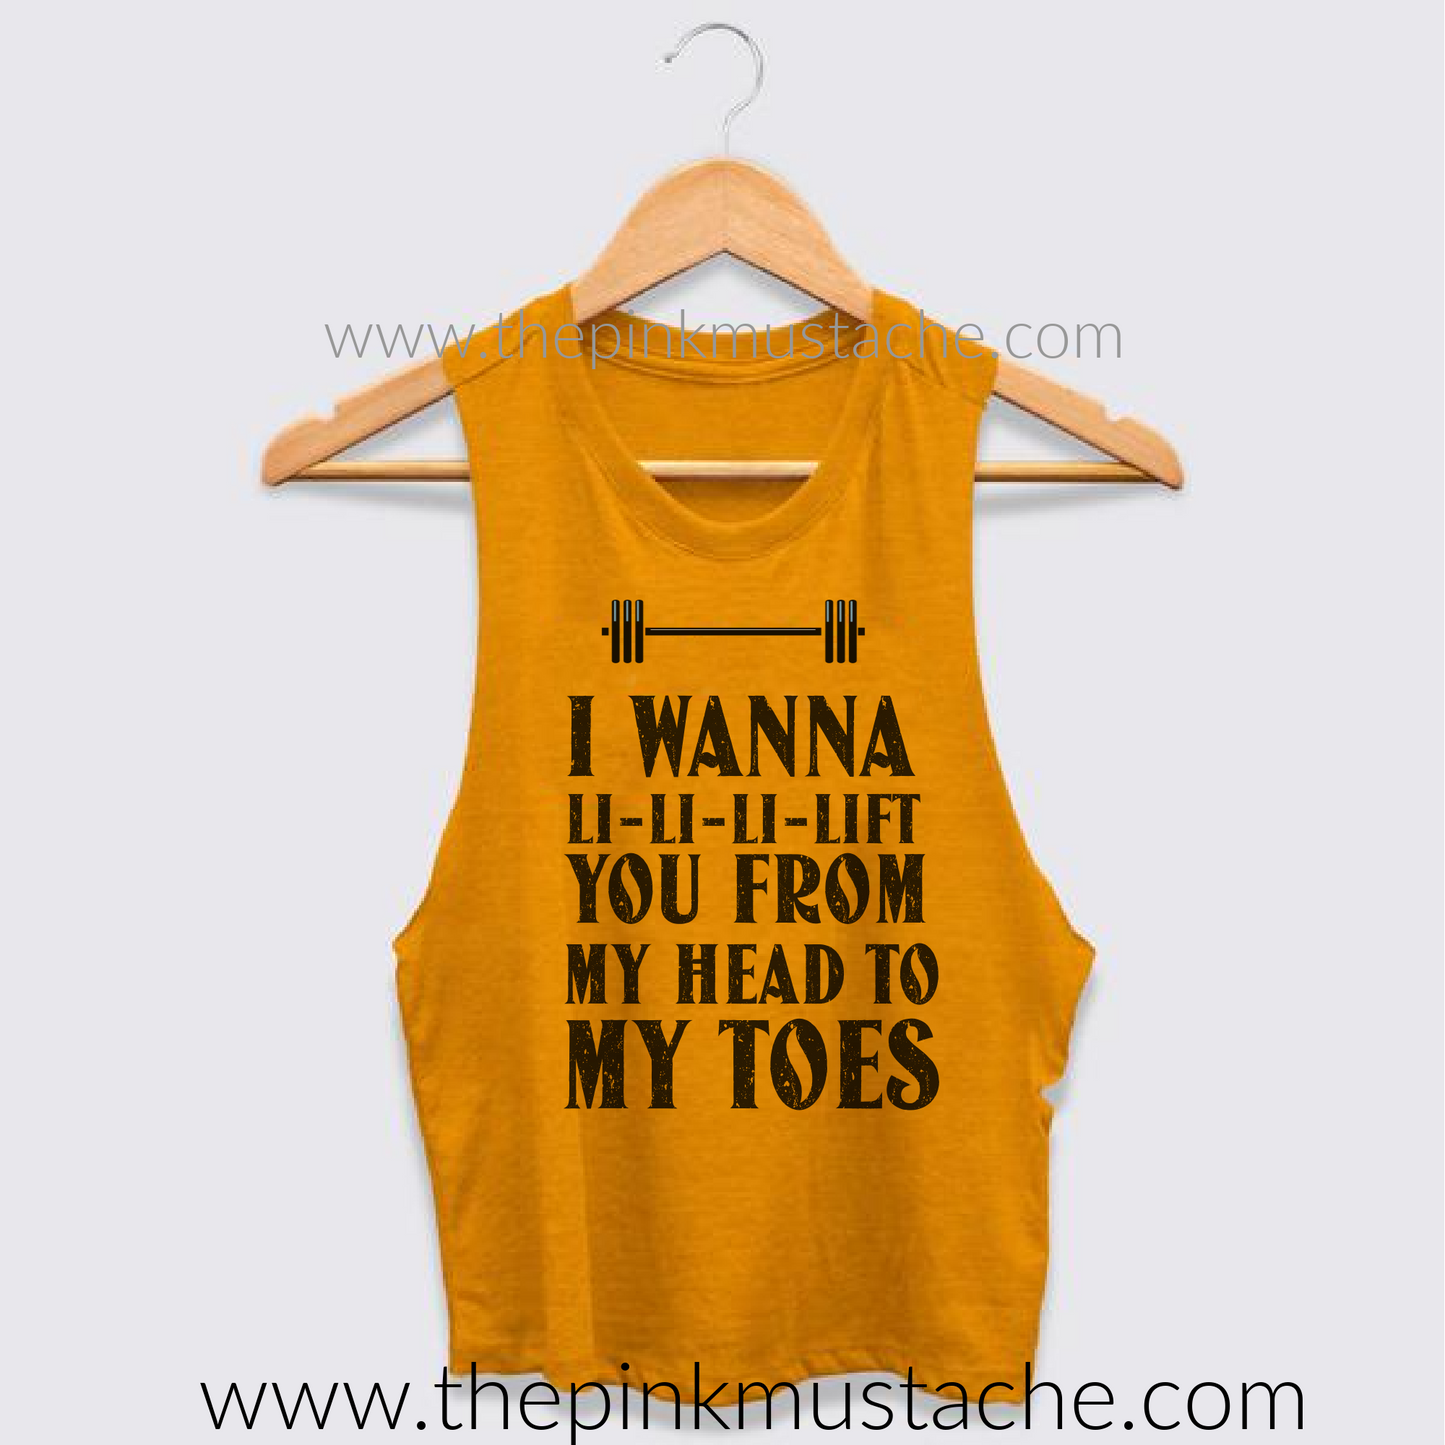 I Wanna Li-Li- Li Lift You From Your Head To Your Toes Crossfit Tank Top - Ladies Cropped Tanks - Bella Canvas Muscle Tanks